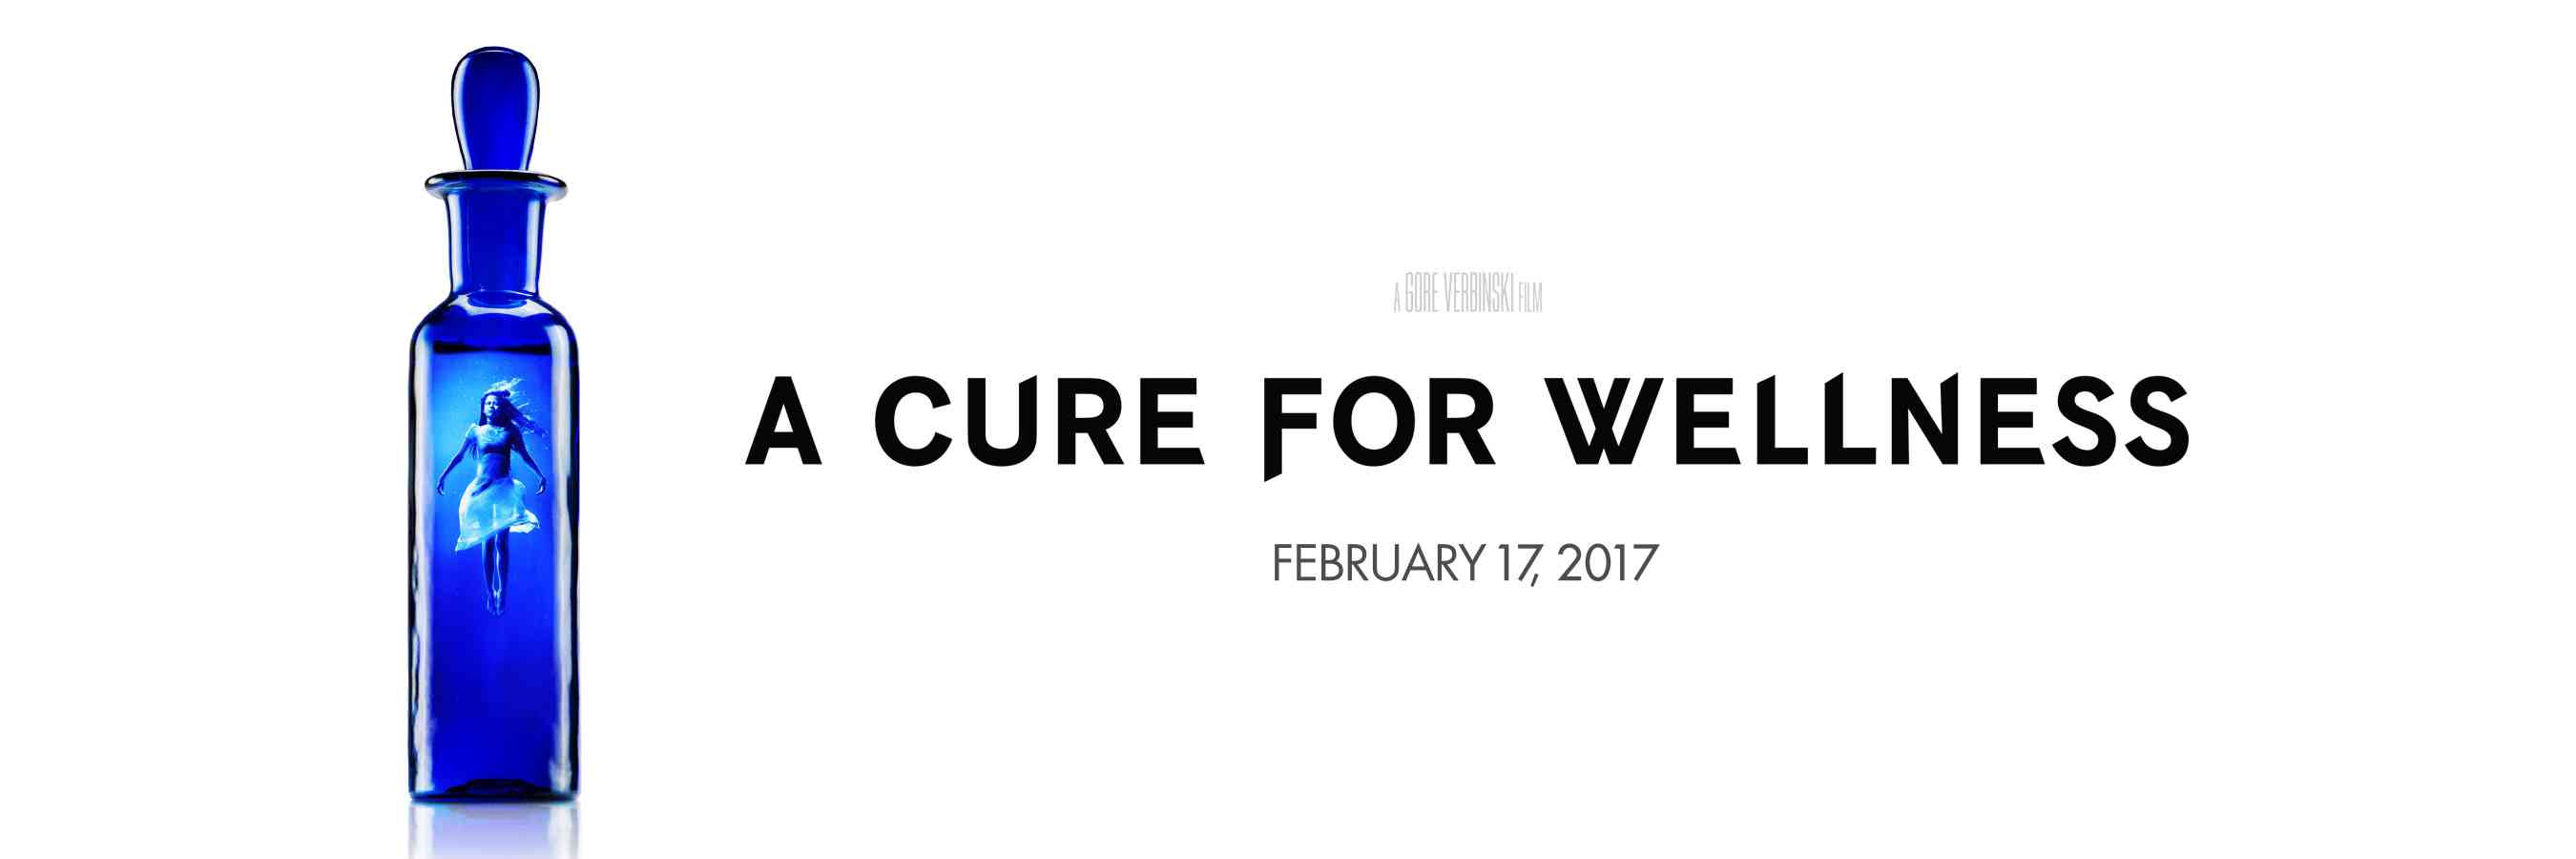 A Cure for Wellness Movie info